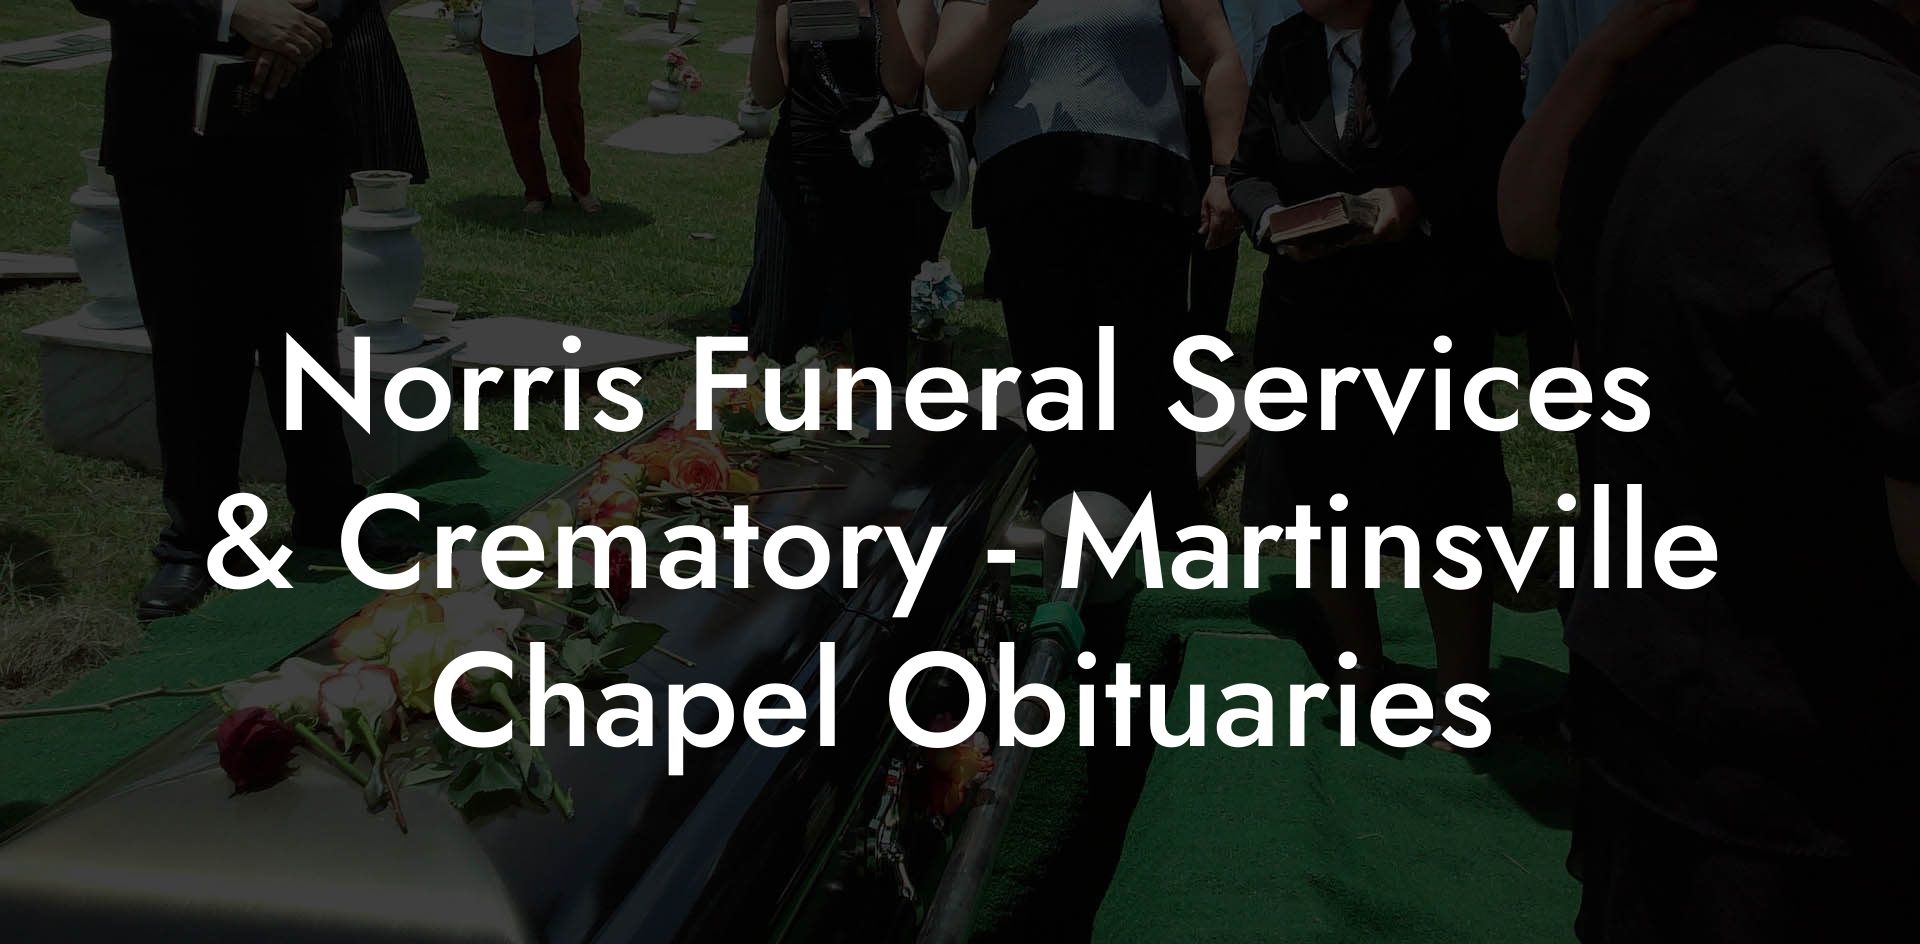 Norris Funeral Services & Crematory - Martinsville Chapel Obituaries